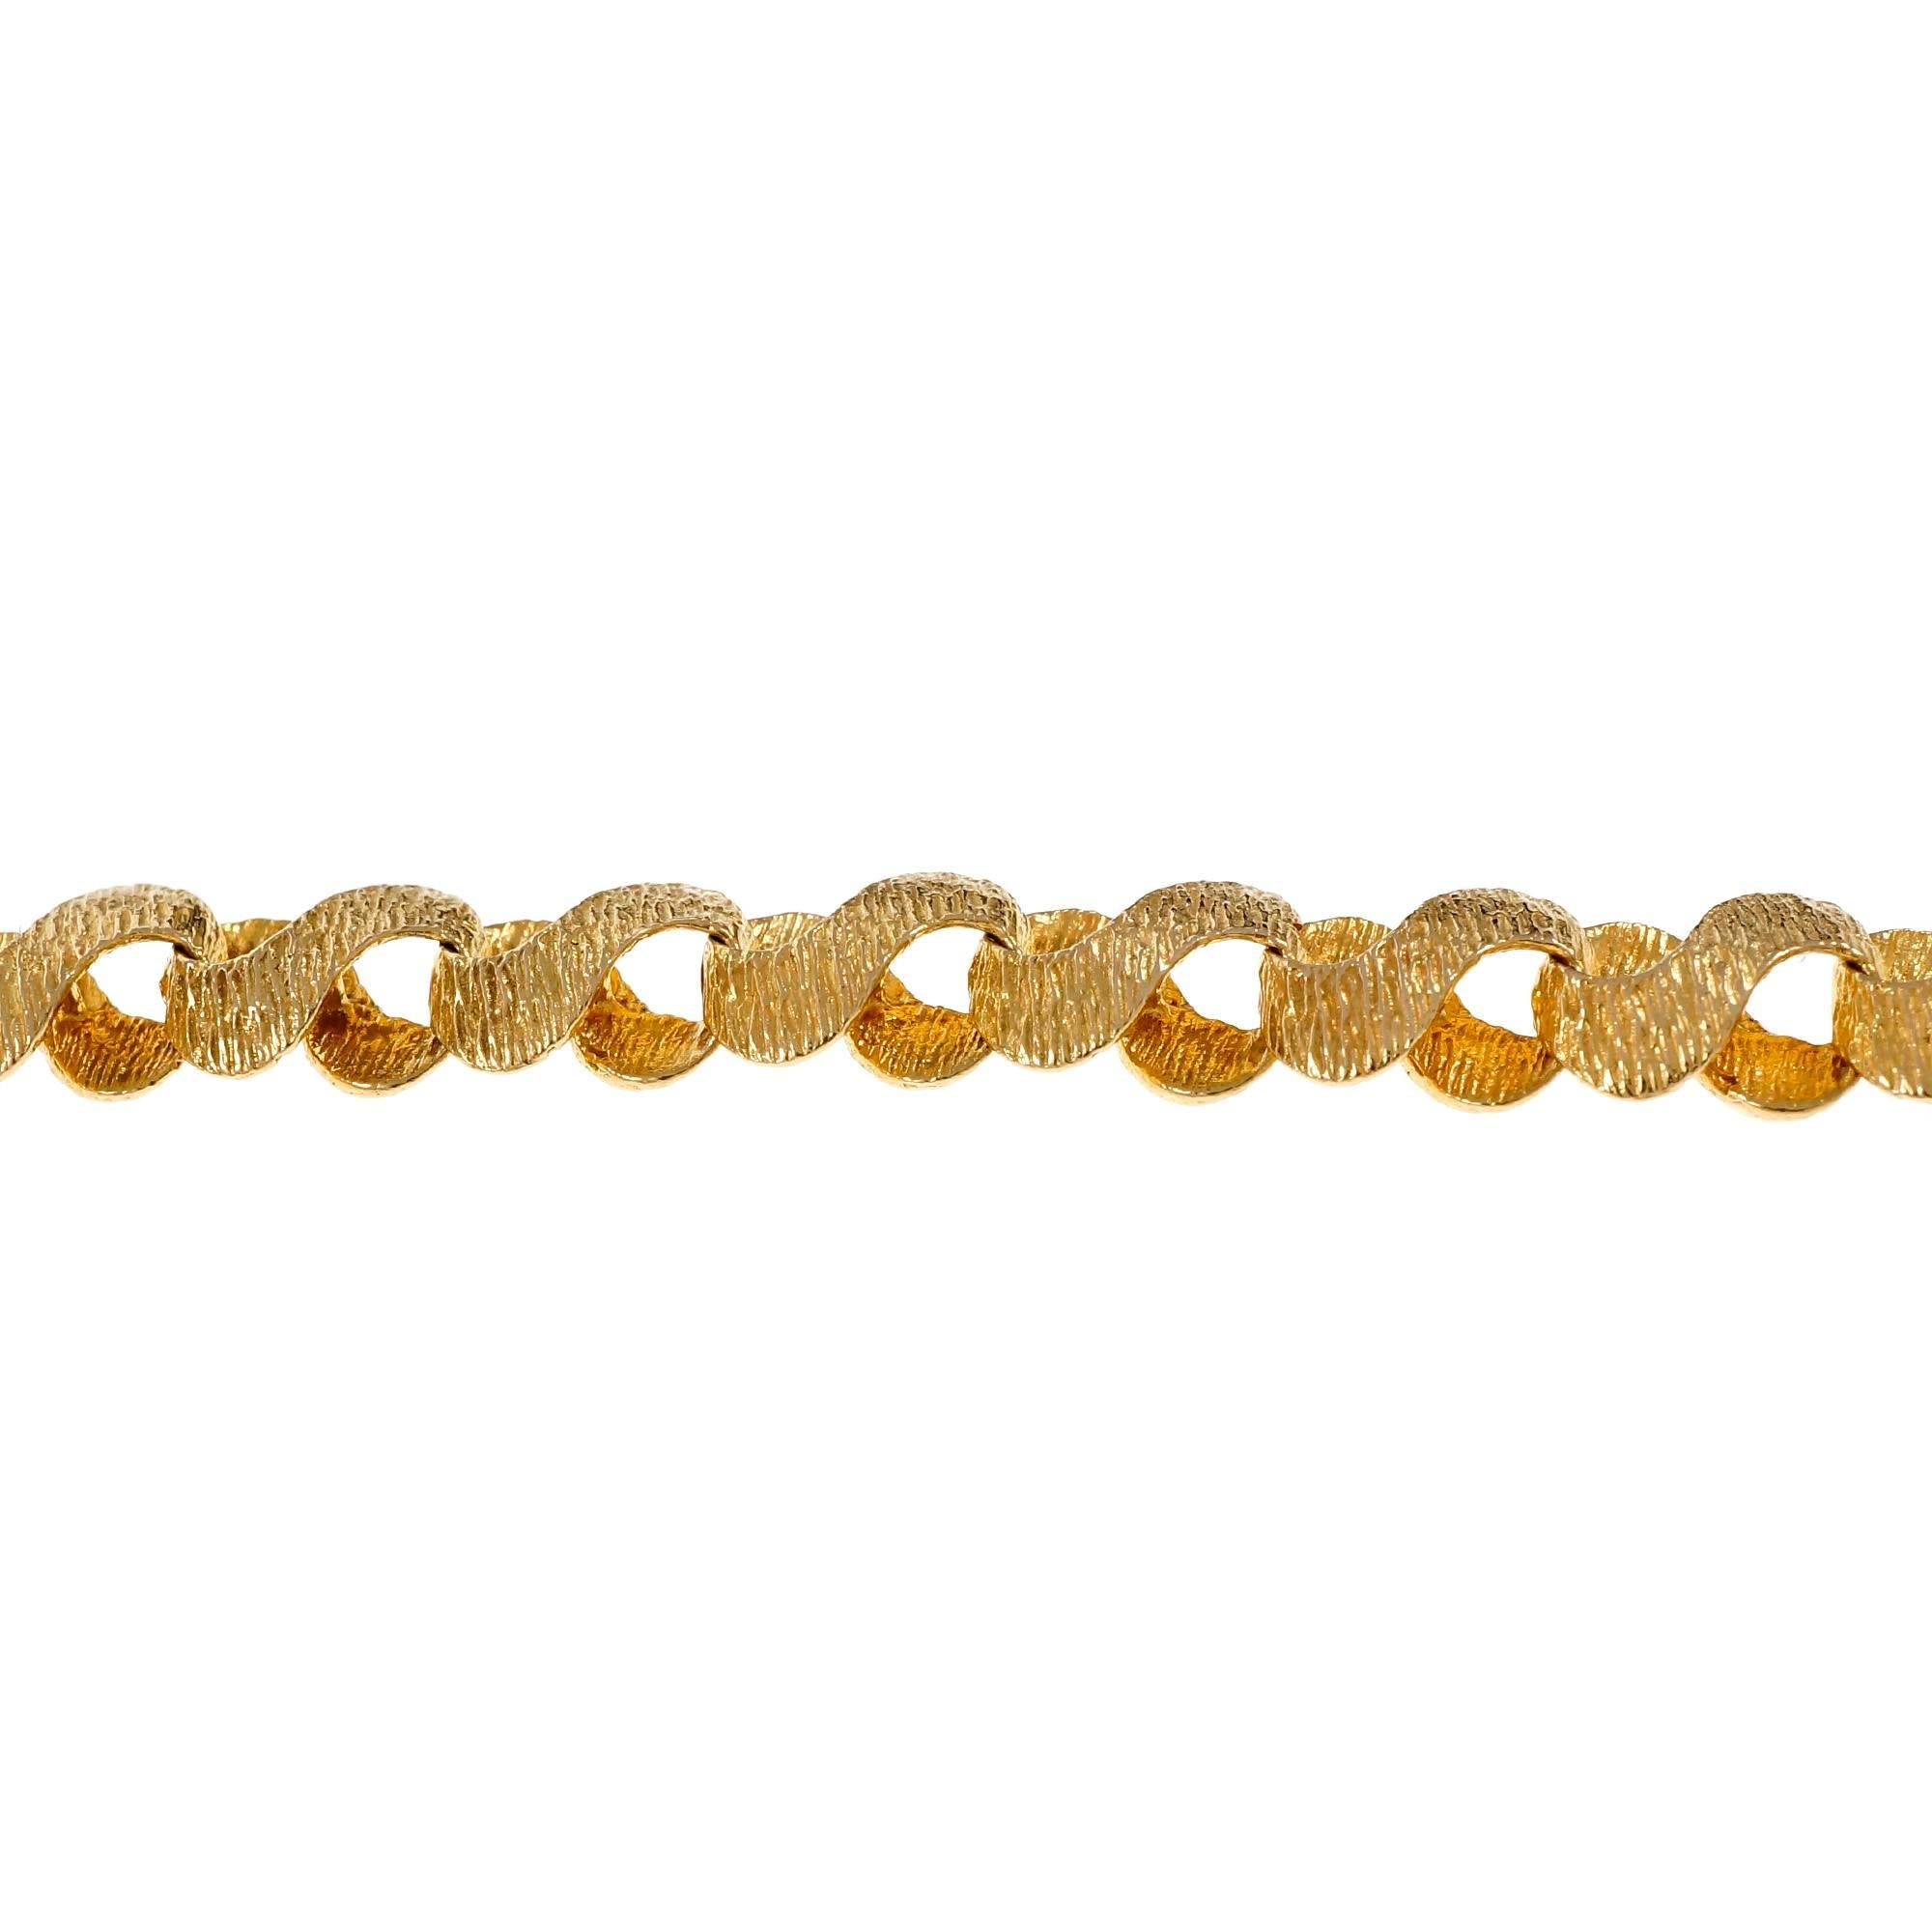 1960 vintage hand textured 14k yellow gold swirl link 18.8 inch necklace, custom finish. Not shiny.

14k yellow gold
Tested and stamped: 14k
Hallmark: ATC Italy
23.1 grams
Length: 18.5 inches – Width: 6.72mm – Depth: 3.04mm
